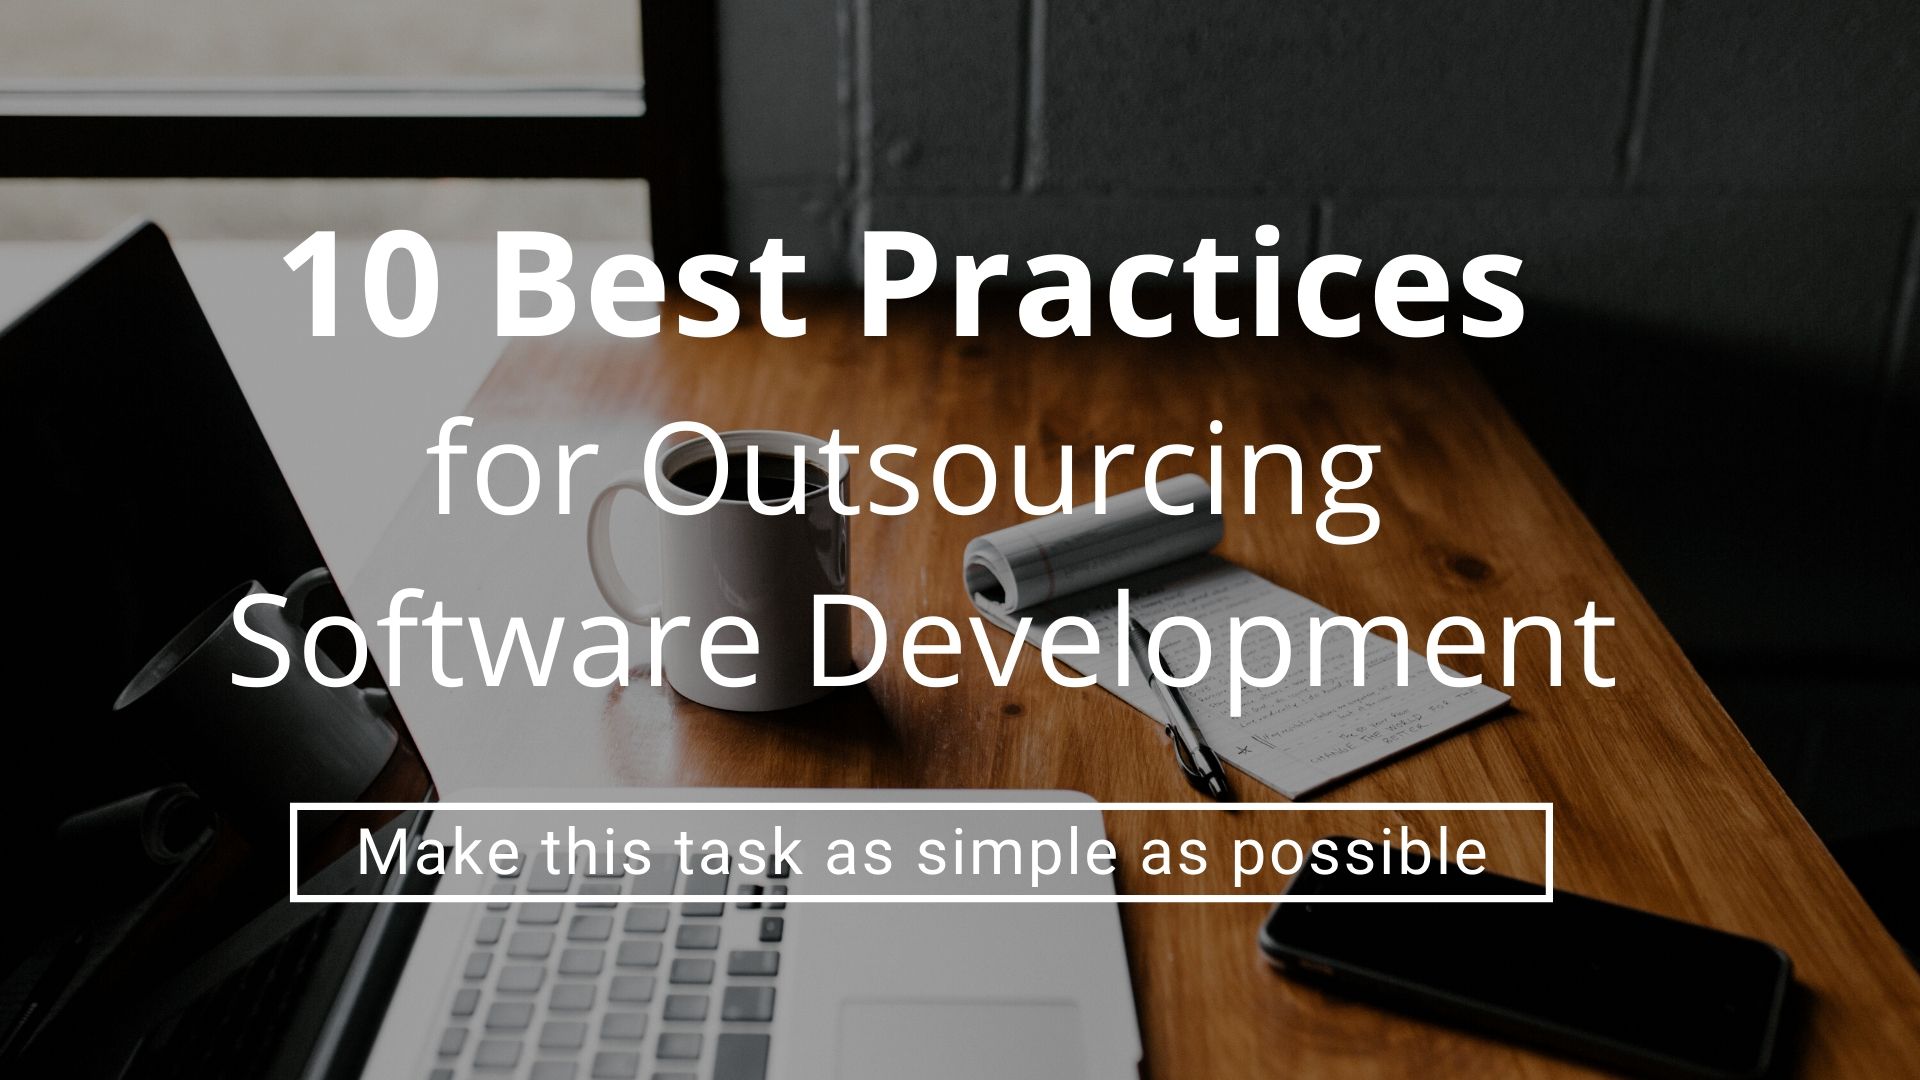 10 Best Practices for Outsourcing Software Development